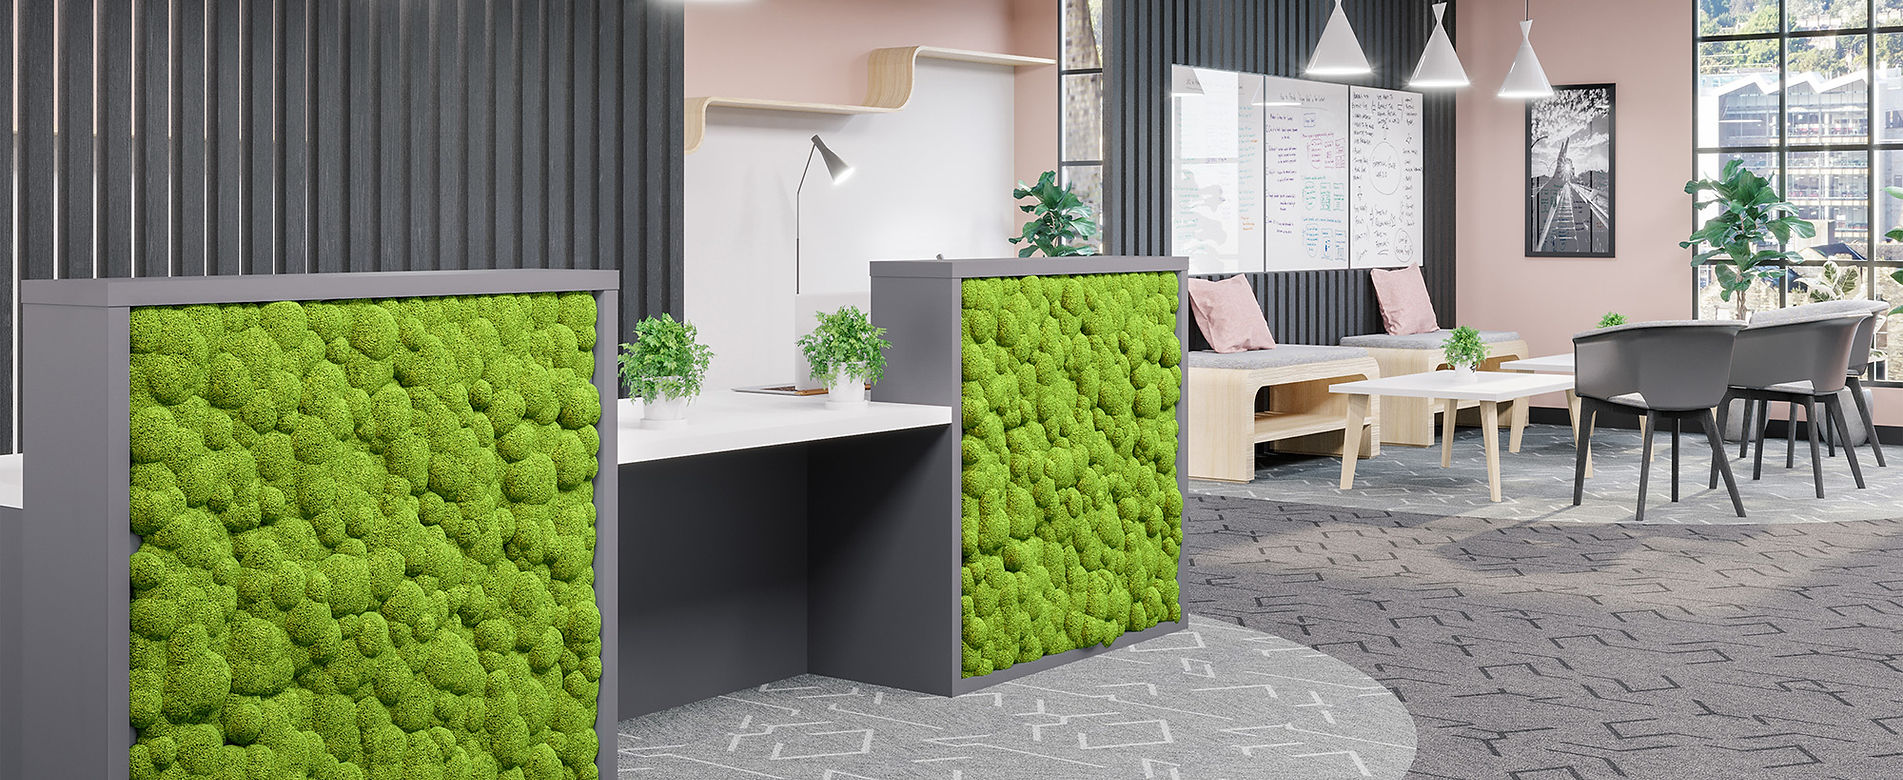 Moss Wall and Reception Counter